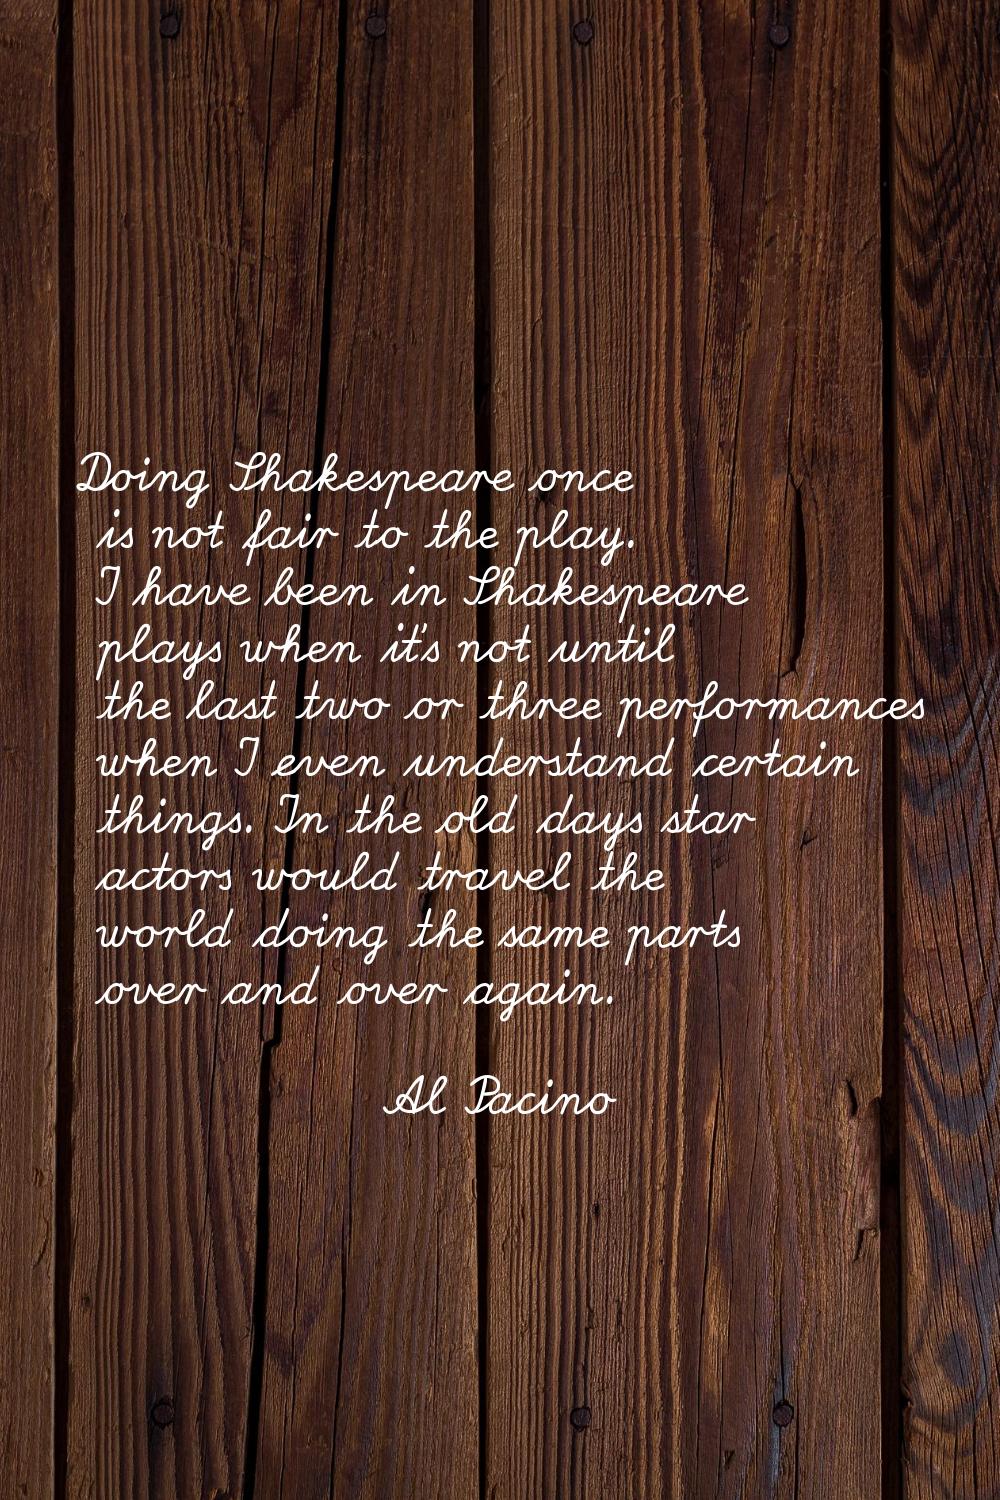 Doing Shakespeare once is not fair to the play. I have been in Shakespeare plays when it's not unti